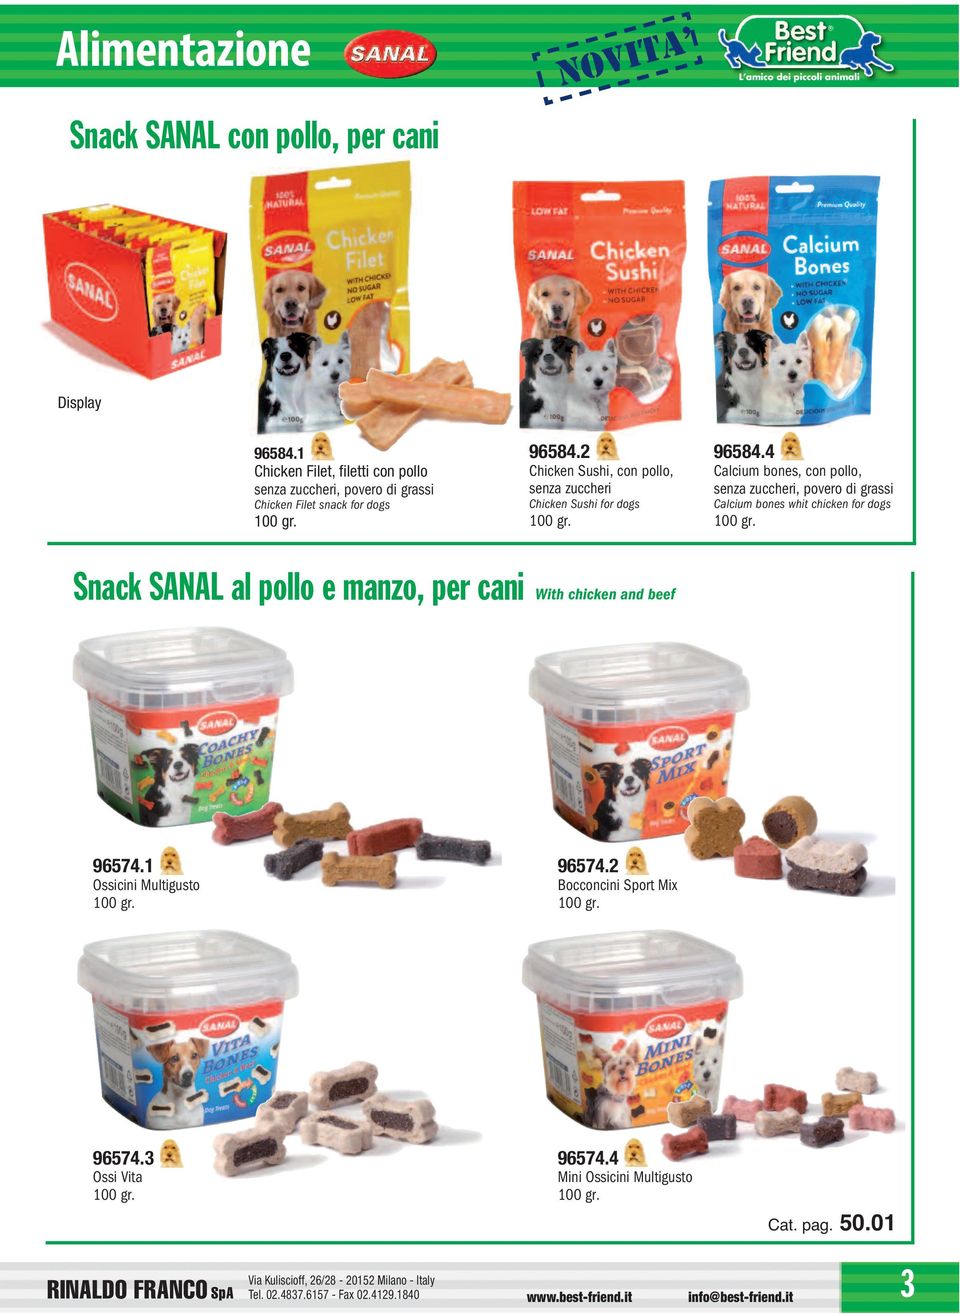 per cani 96584.2 Chicken Sushi, con pollo, senza zuccheri Chicken Sushi for dogs With chicken and beef 96584.